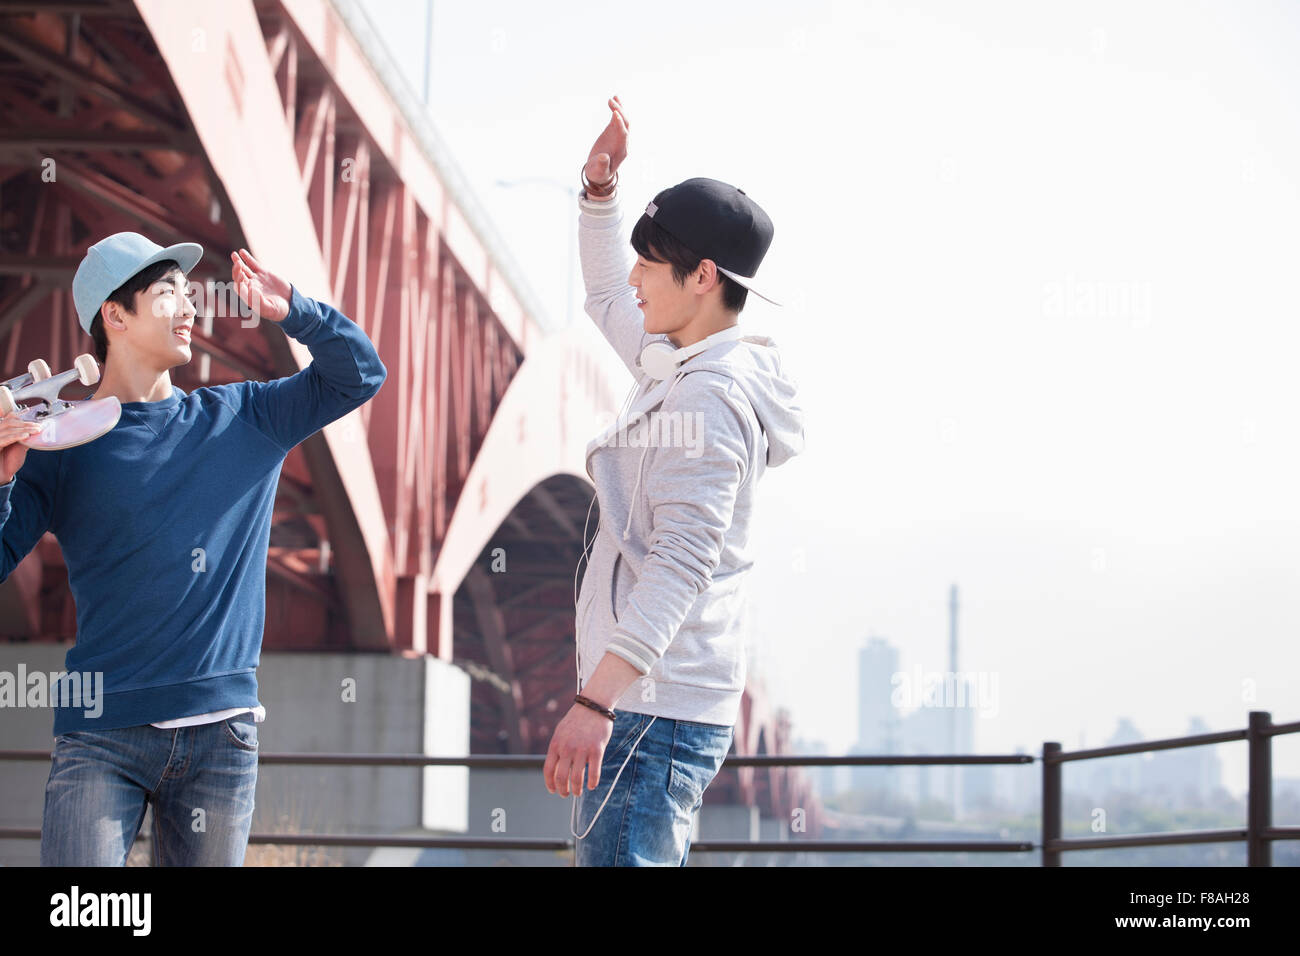 Two men wearing a cap and giving high-fives to each other Stock Photo